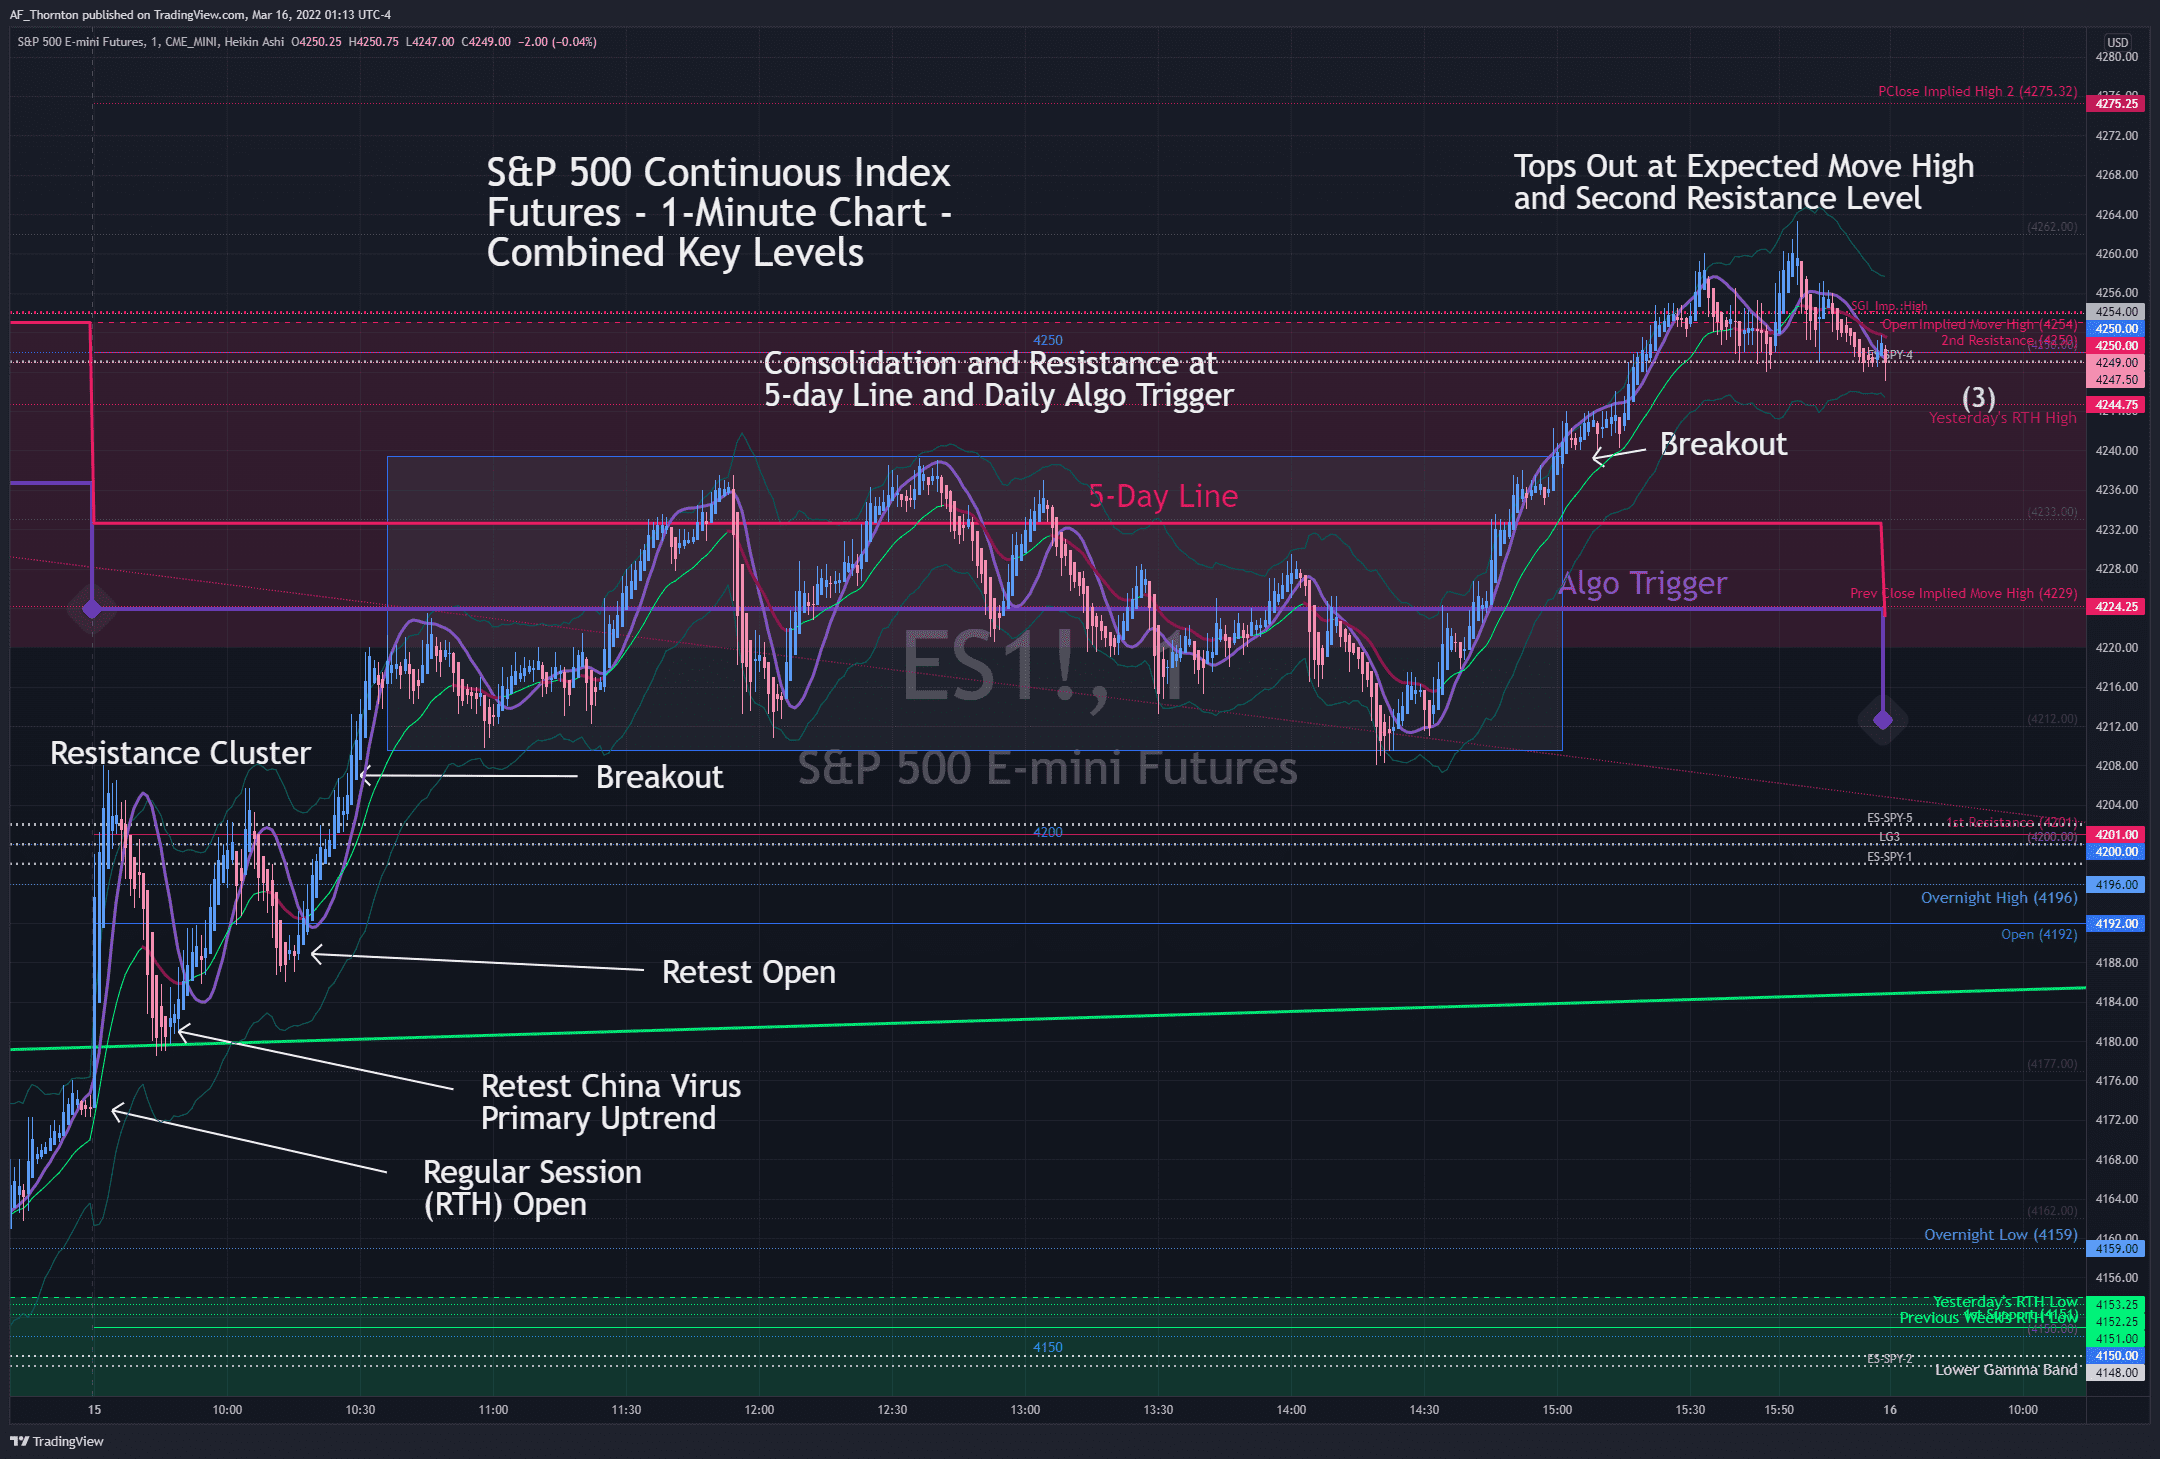 This is a one-minute chart of A.F. Thornton's Key Trading Levels for the 3/15/2021 expected range we call the "Sandbox" bounded by the top of the red shaded area and the bottom of the green shaded area.